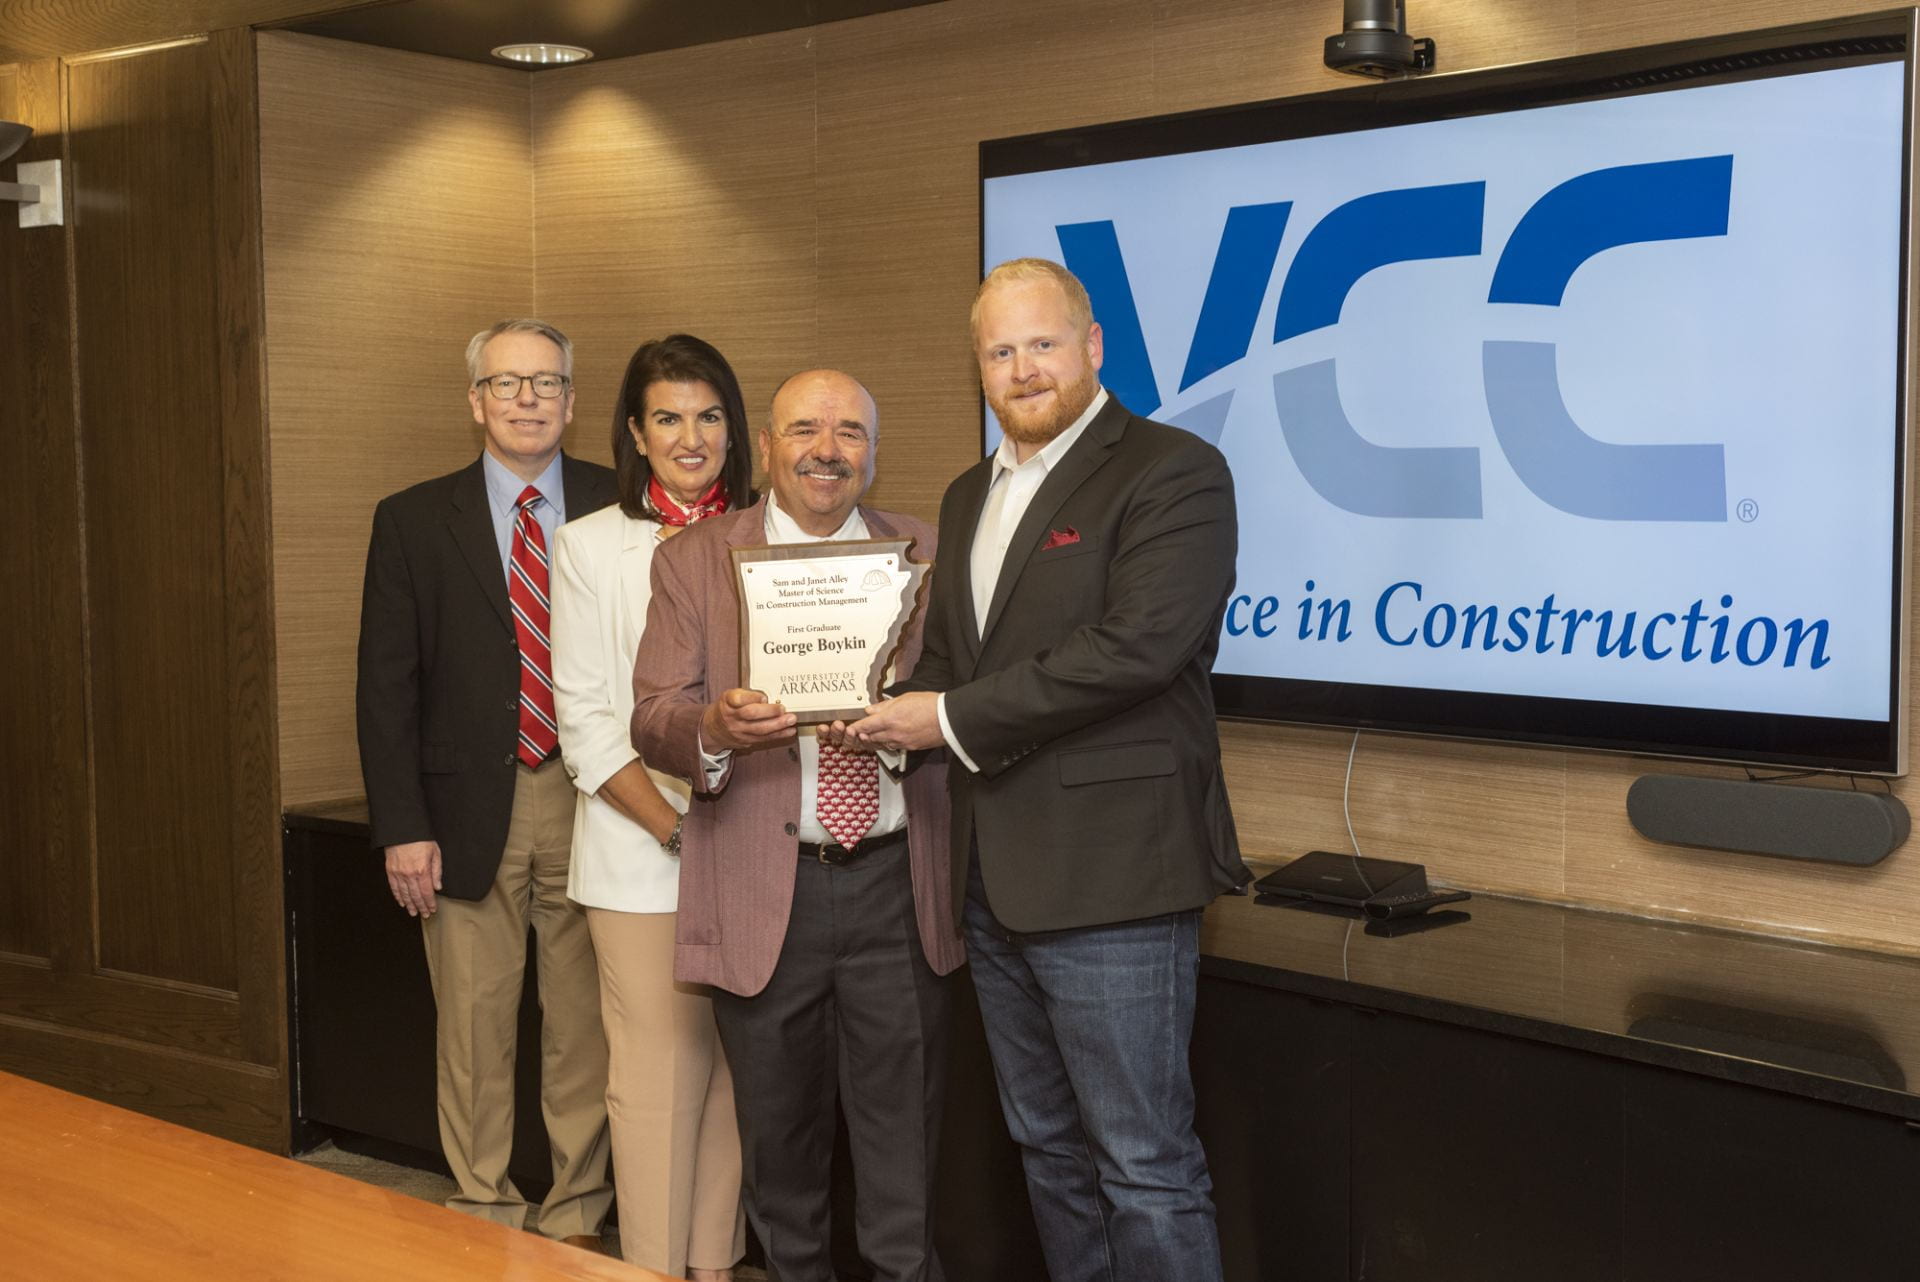 Pictured, from left, are Micah Hale, head of the Department of Civil Engineering, donors Janet and Sam Alley and Master of Science in Construction Management graduate George Boykin.